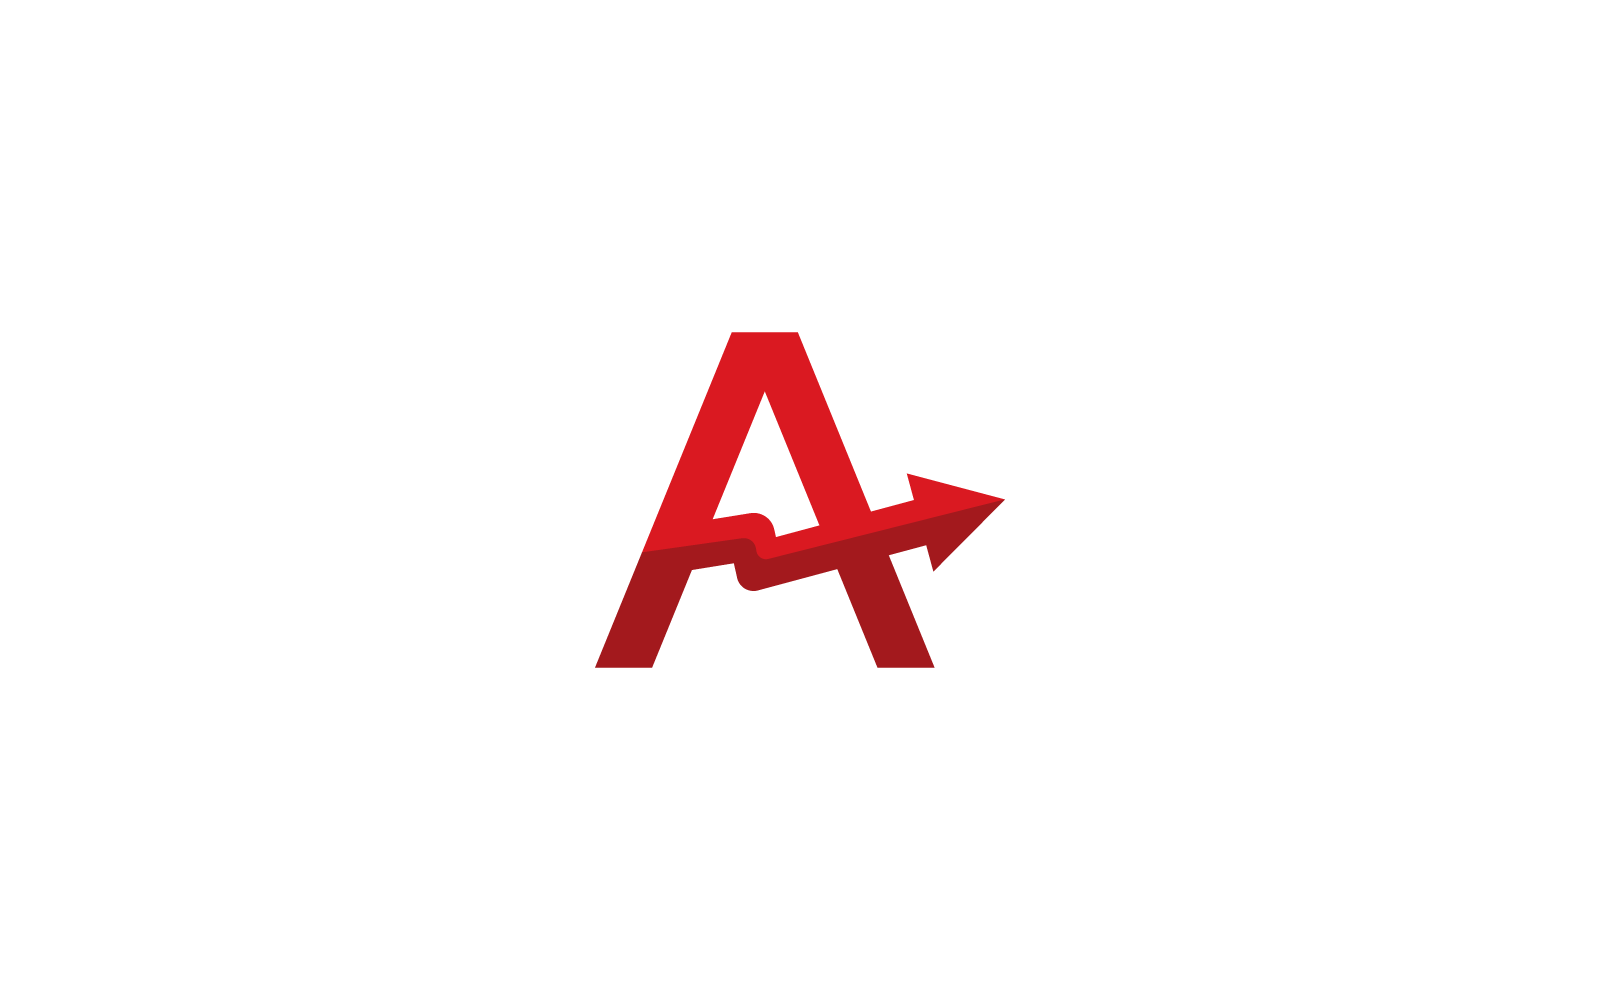 A initial letter with arrow design illustration